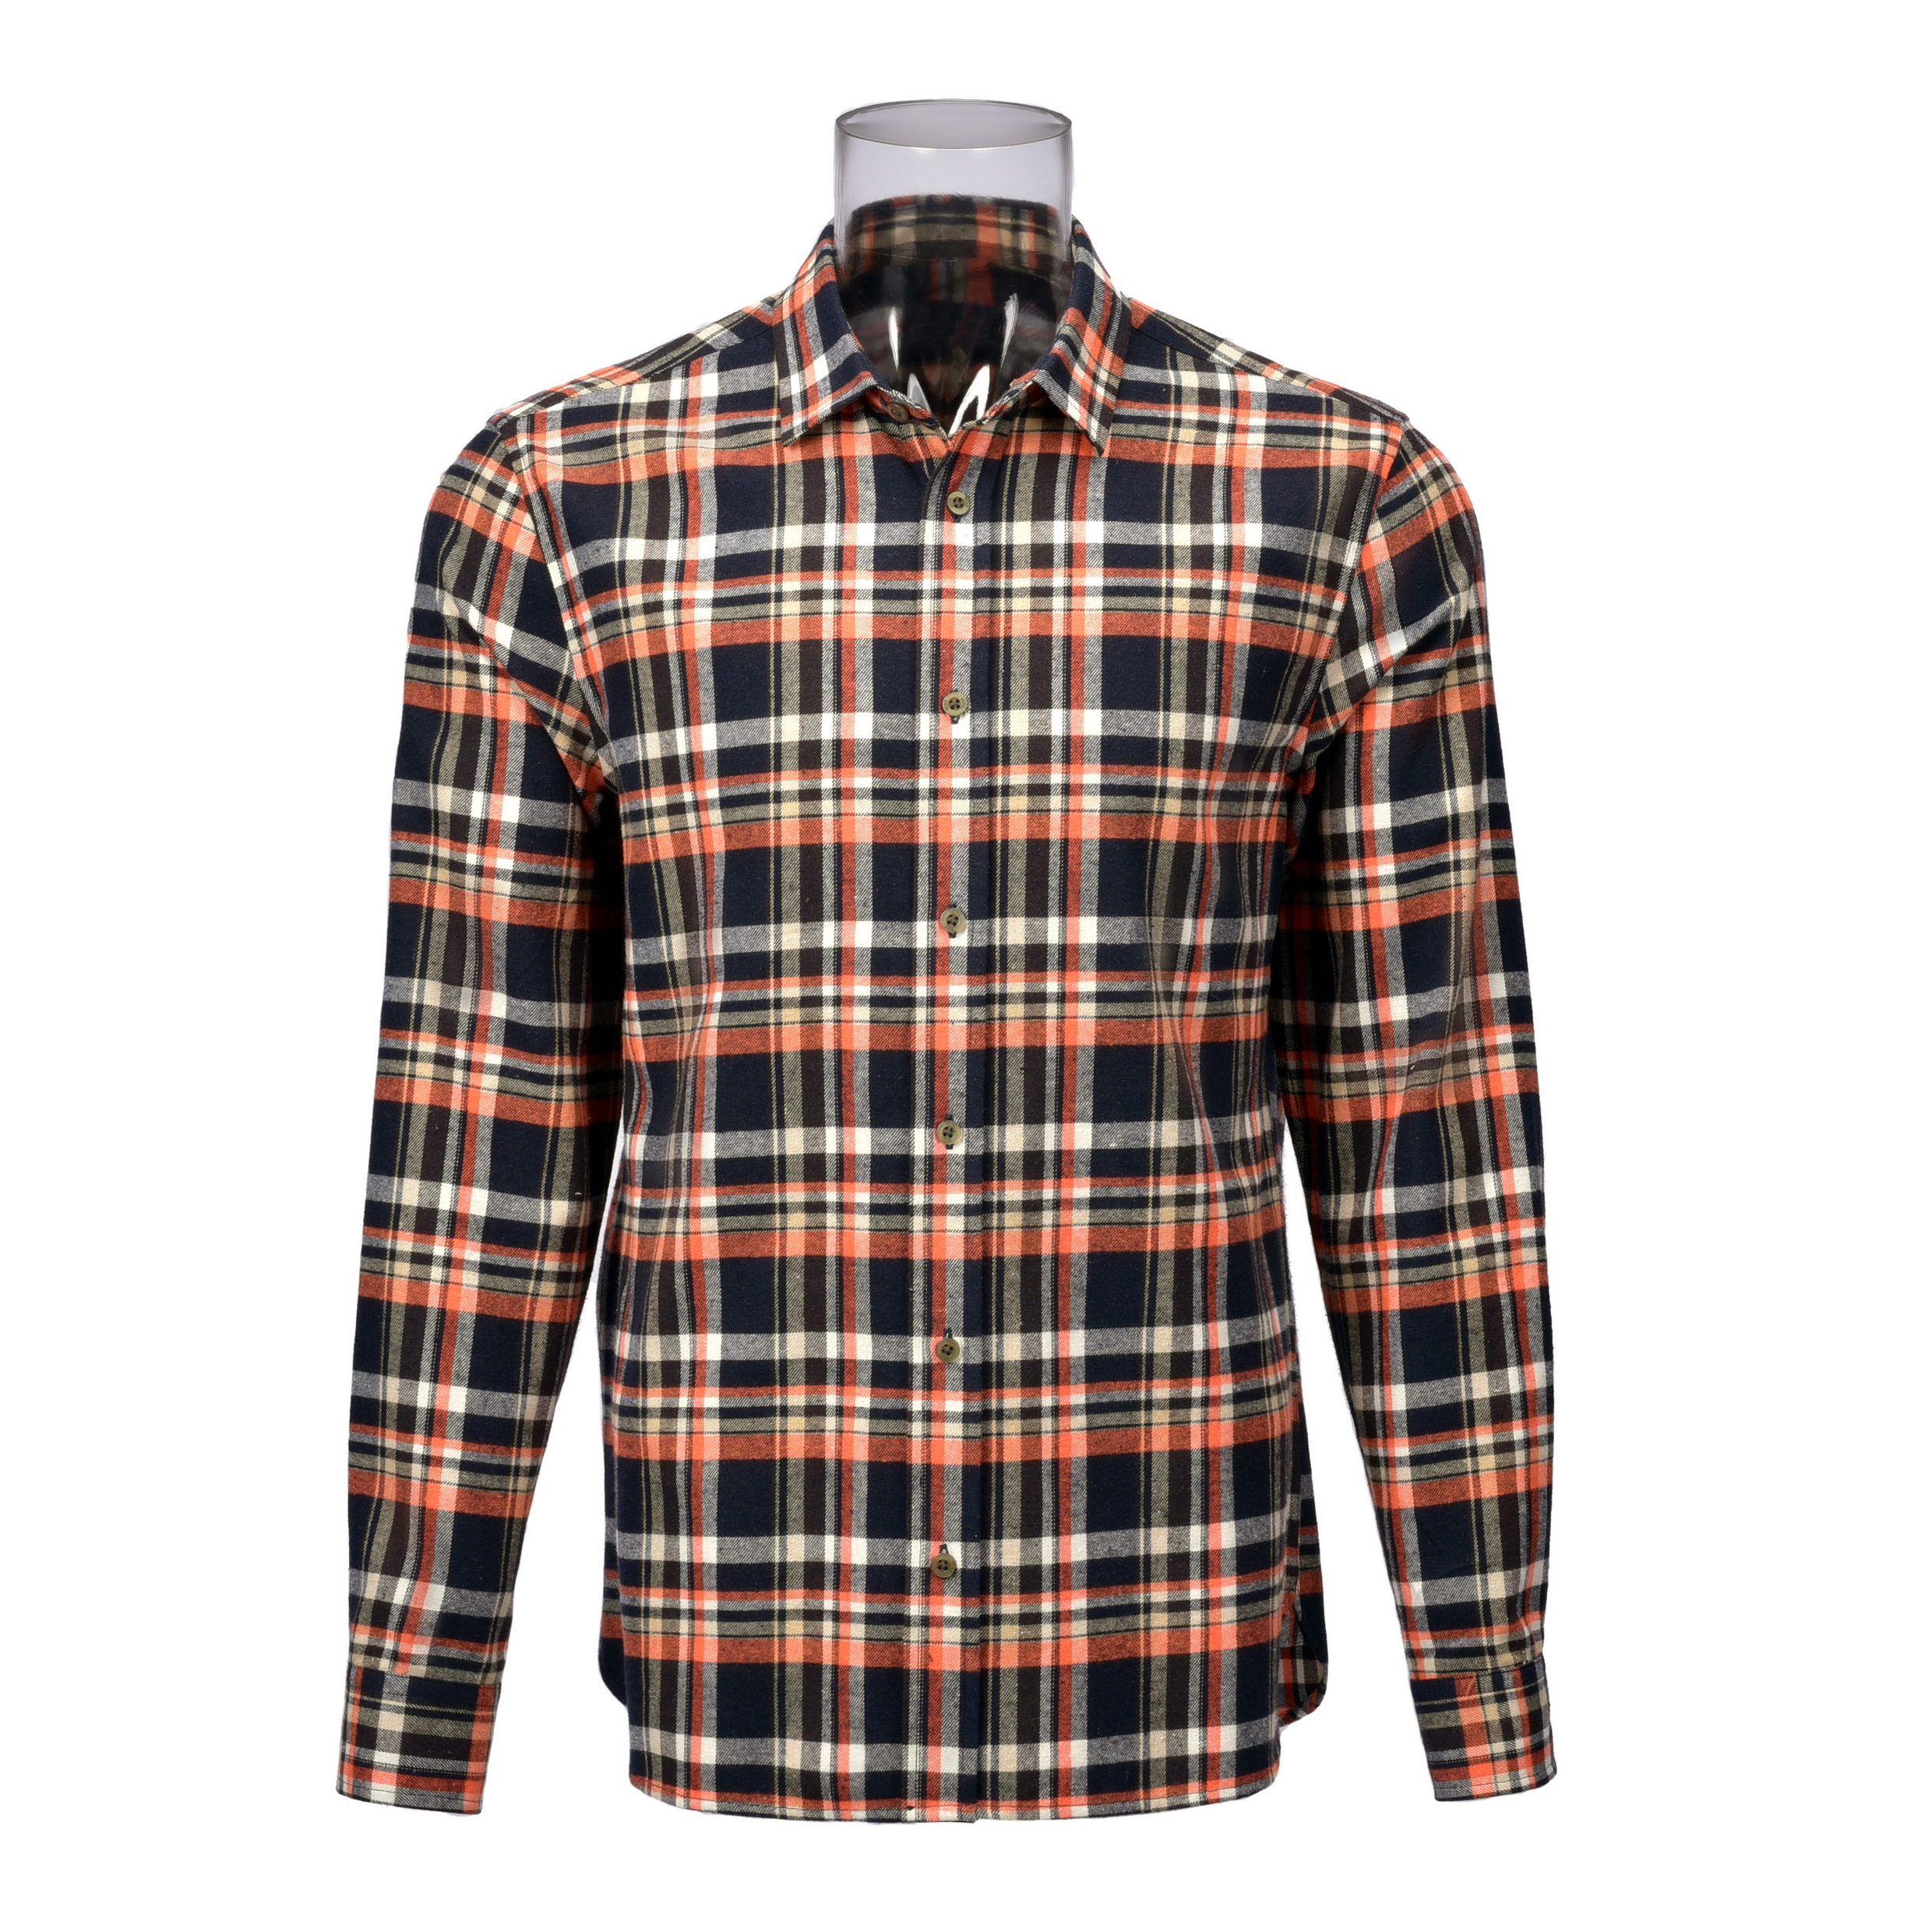 Men’s Long Sleeve Yarn Dyed Check Shirt With Sustainable 100% Recycled Polyester For Men G-026G1